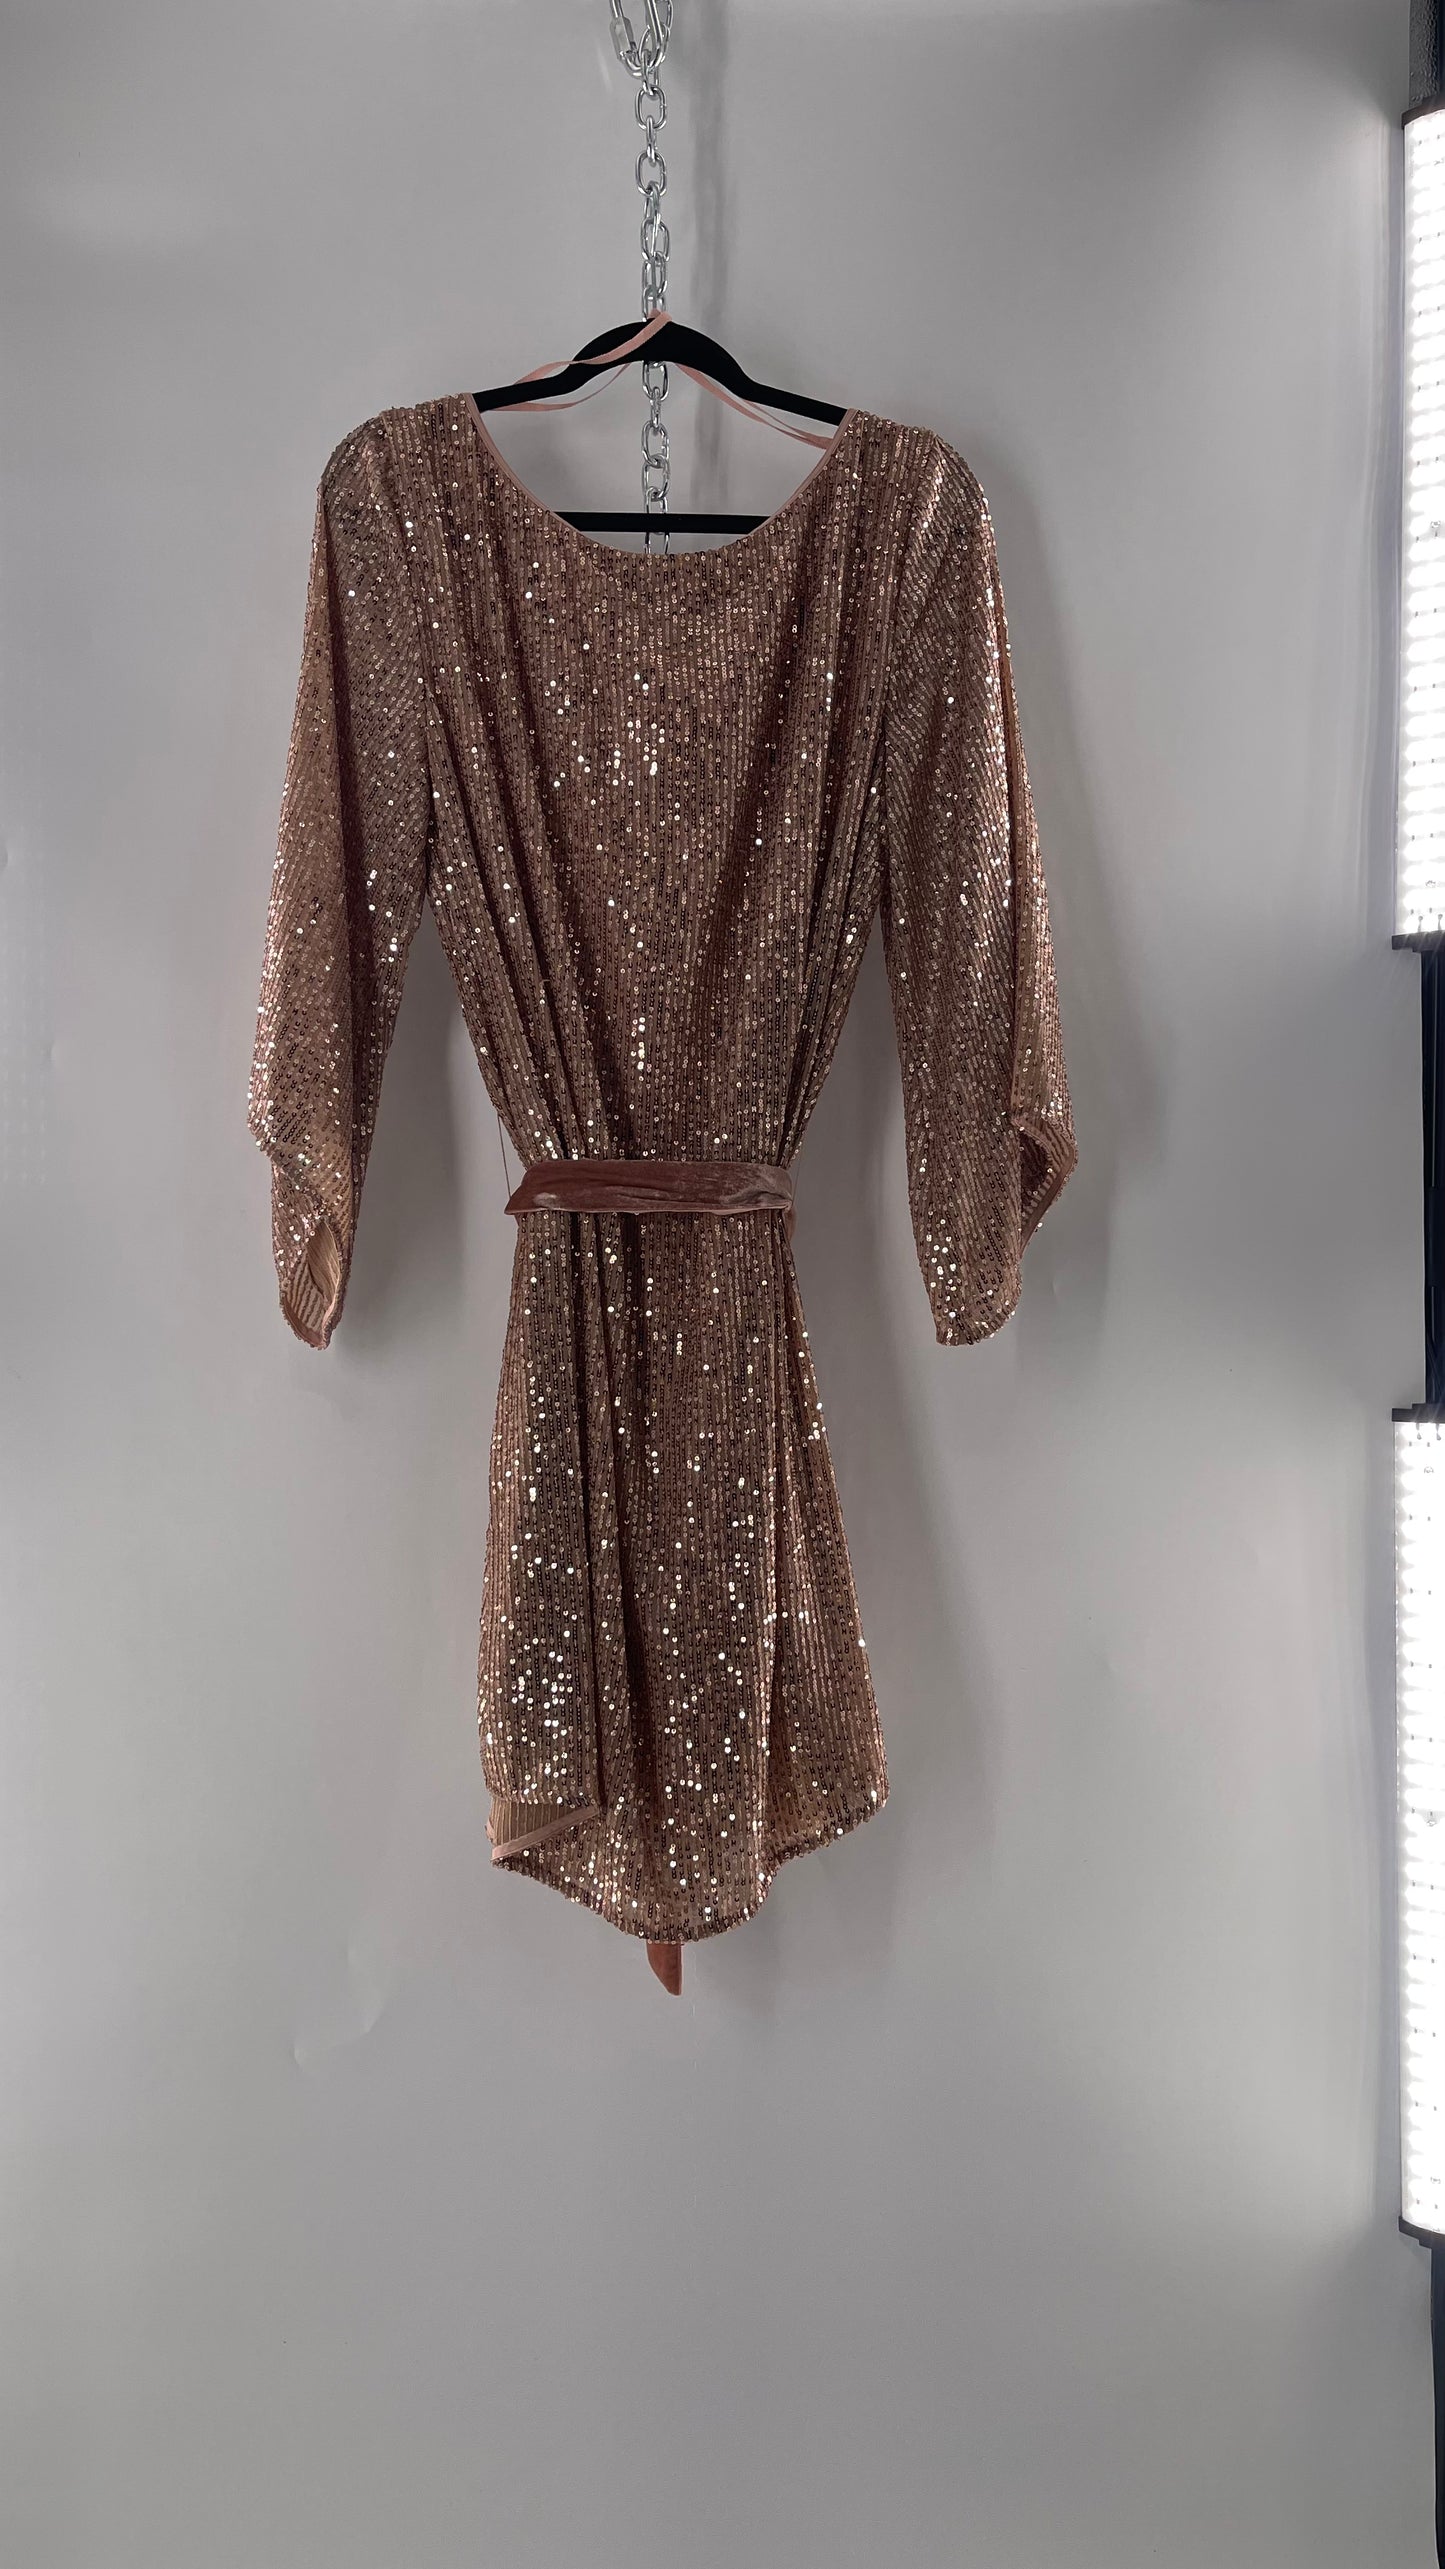 Anthropologie Rose Gold Sequin Dress with Velvet Waist Belt and Tags Attached (XL)